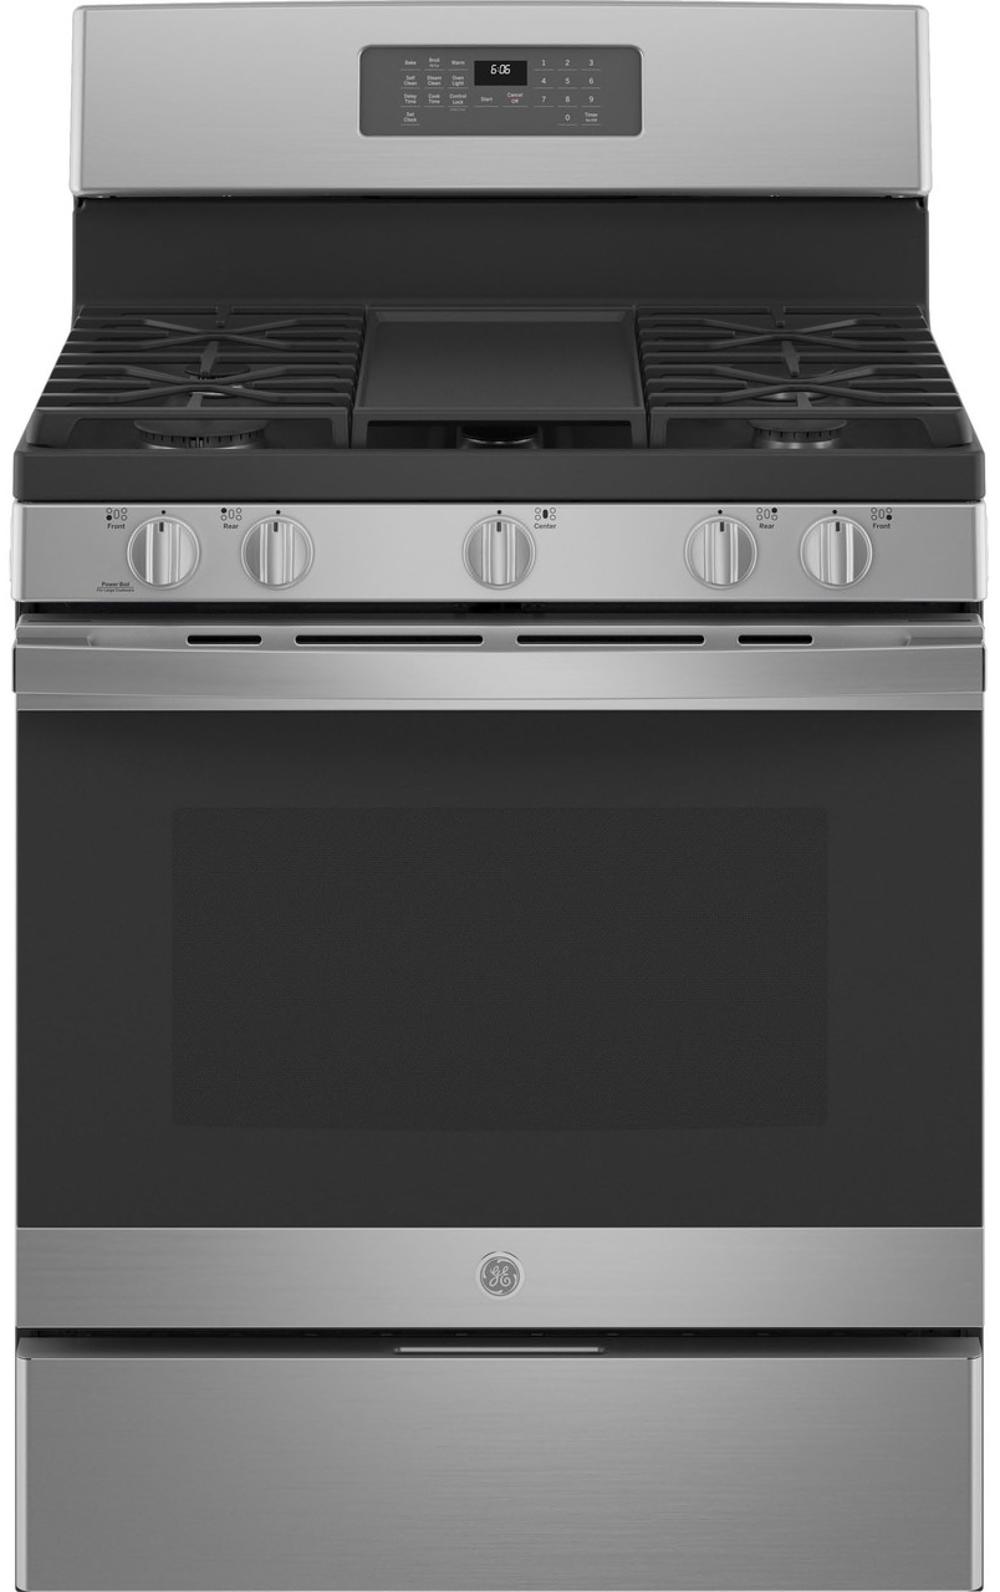 GE 30 Inch Gas Range with Griddle - 5 cu. ft., Stainless Steel